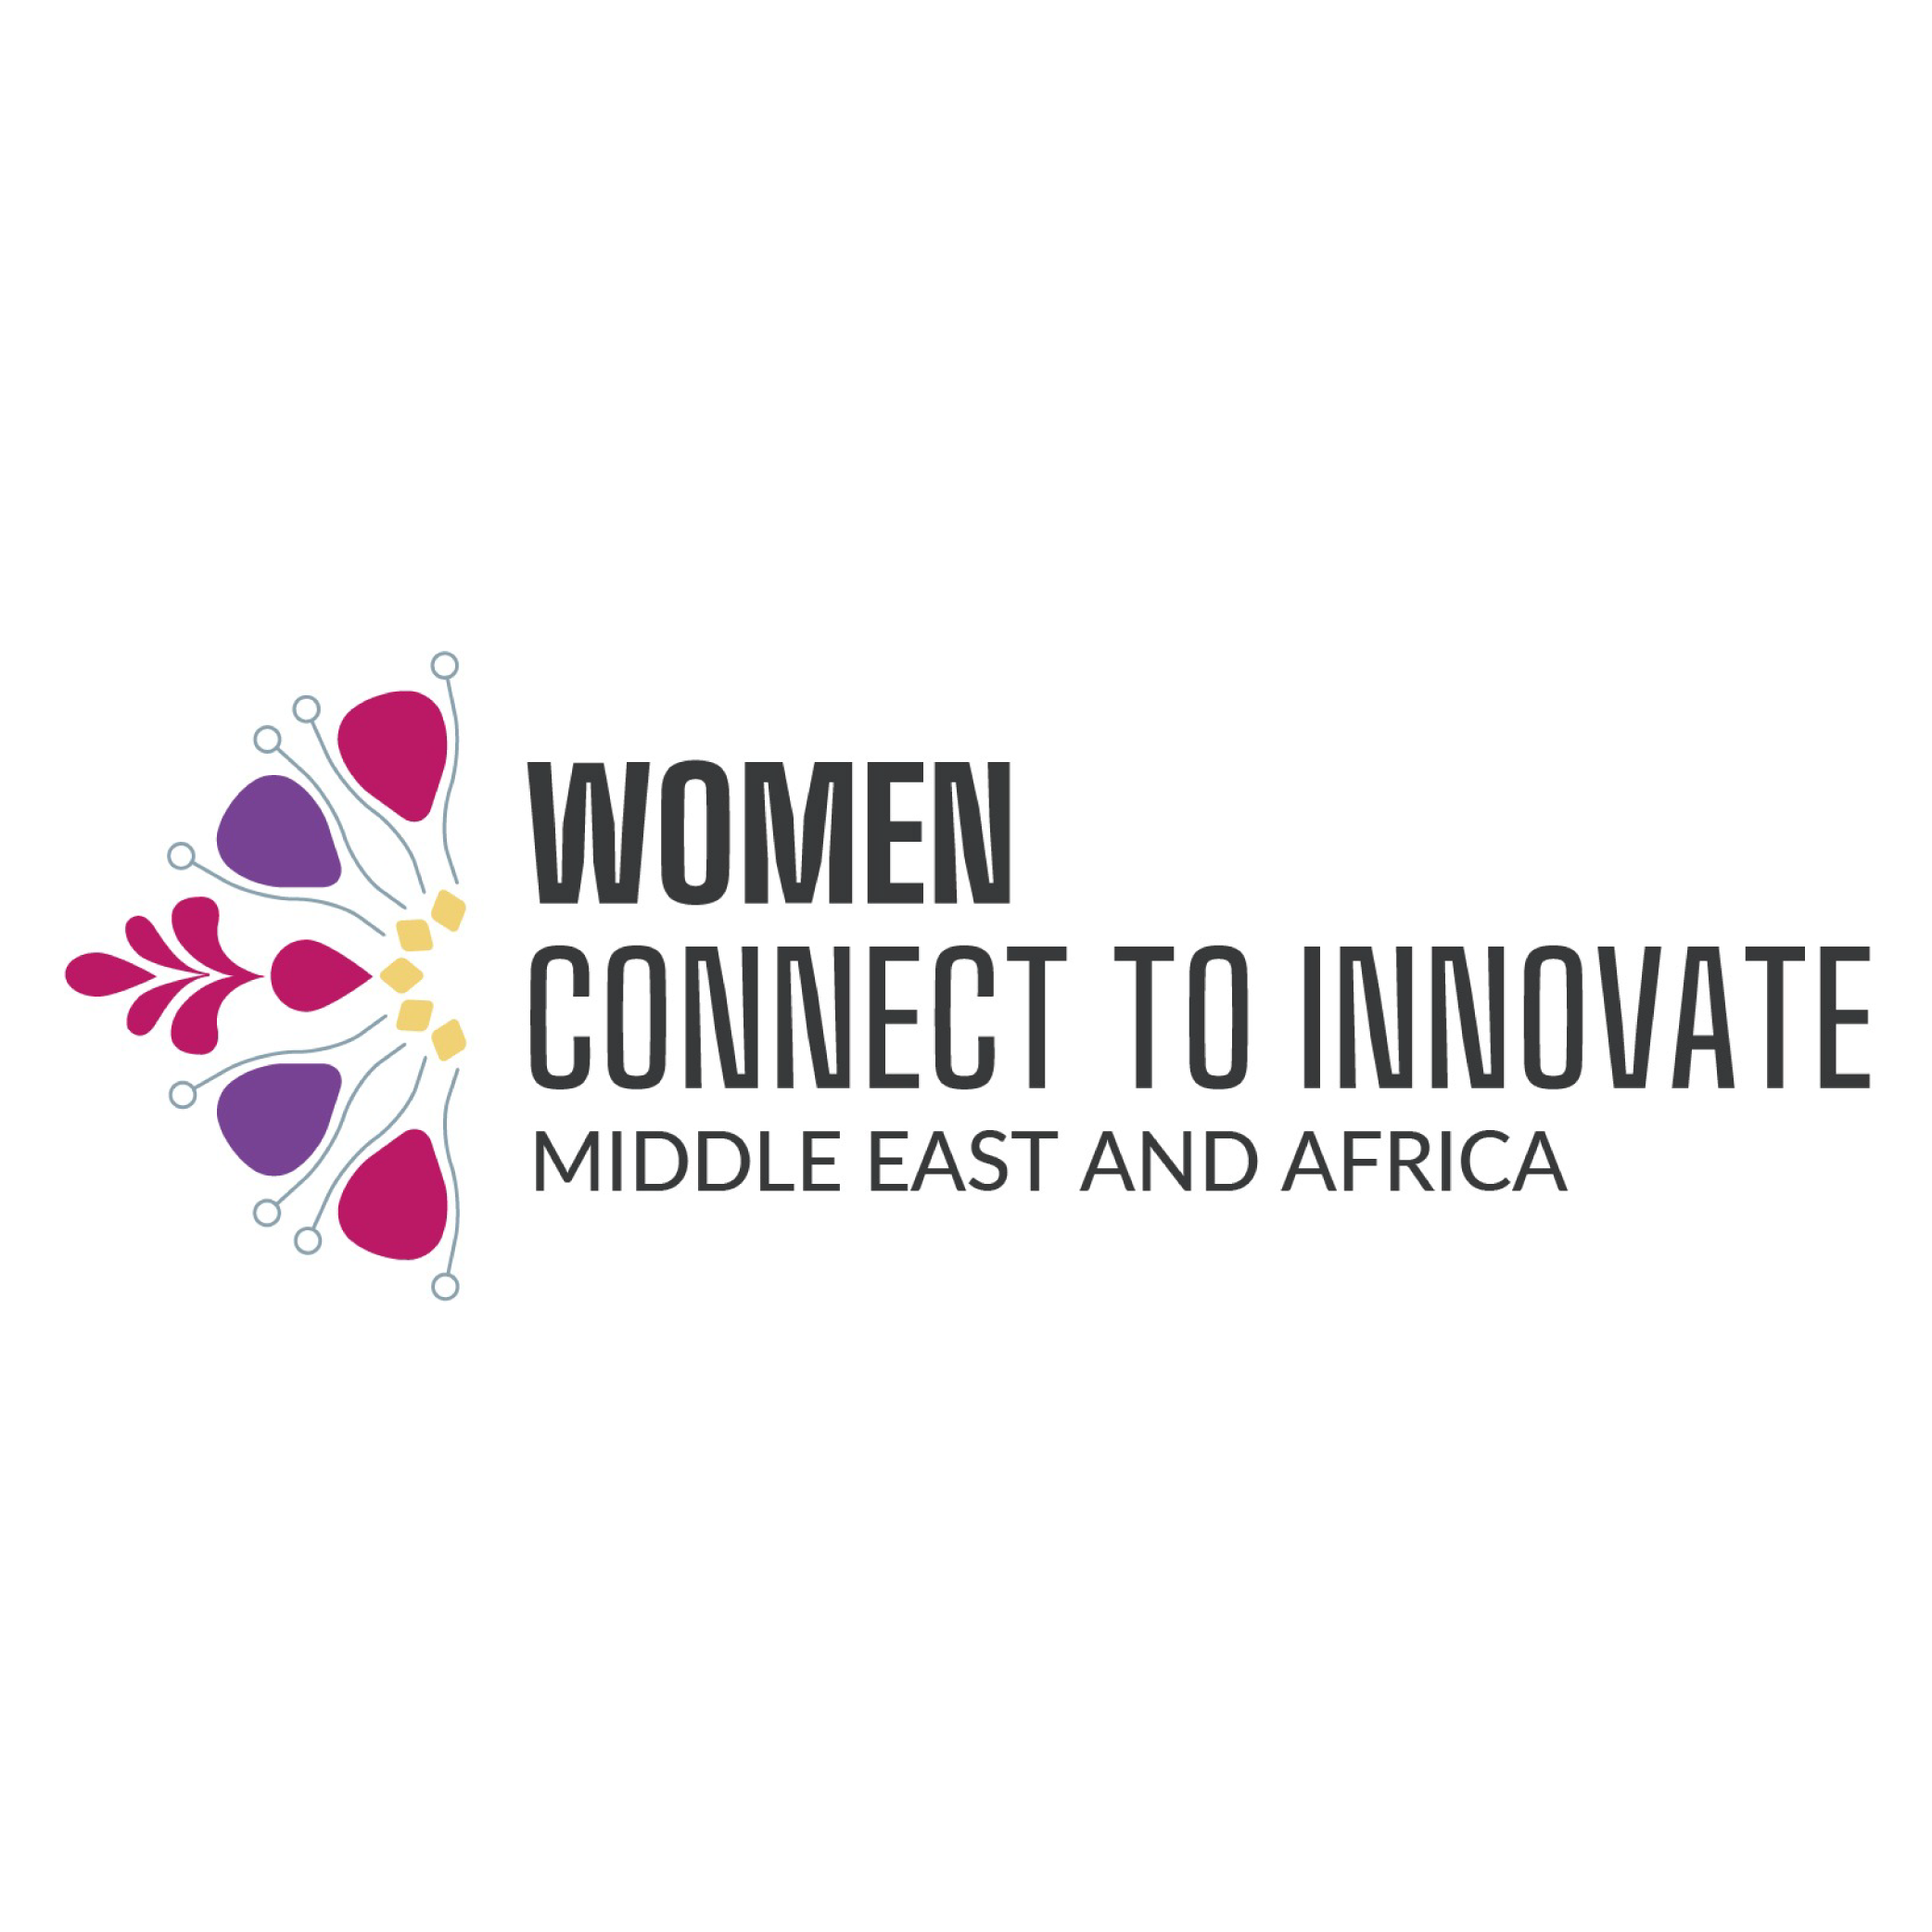 Women Connect to Innovate